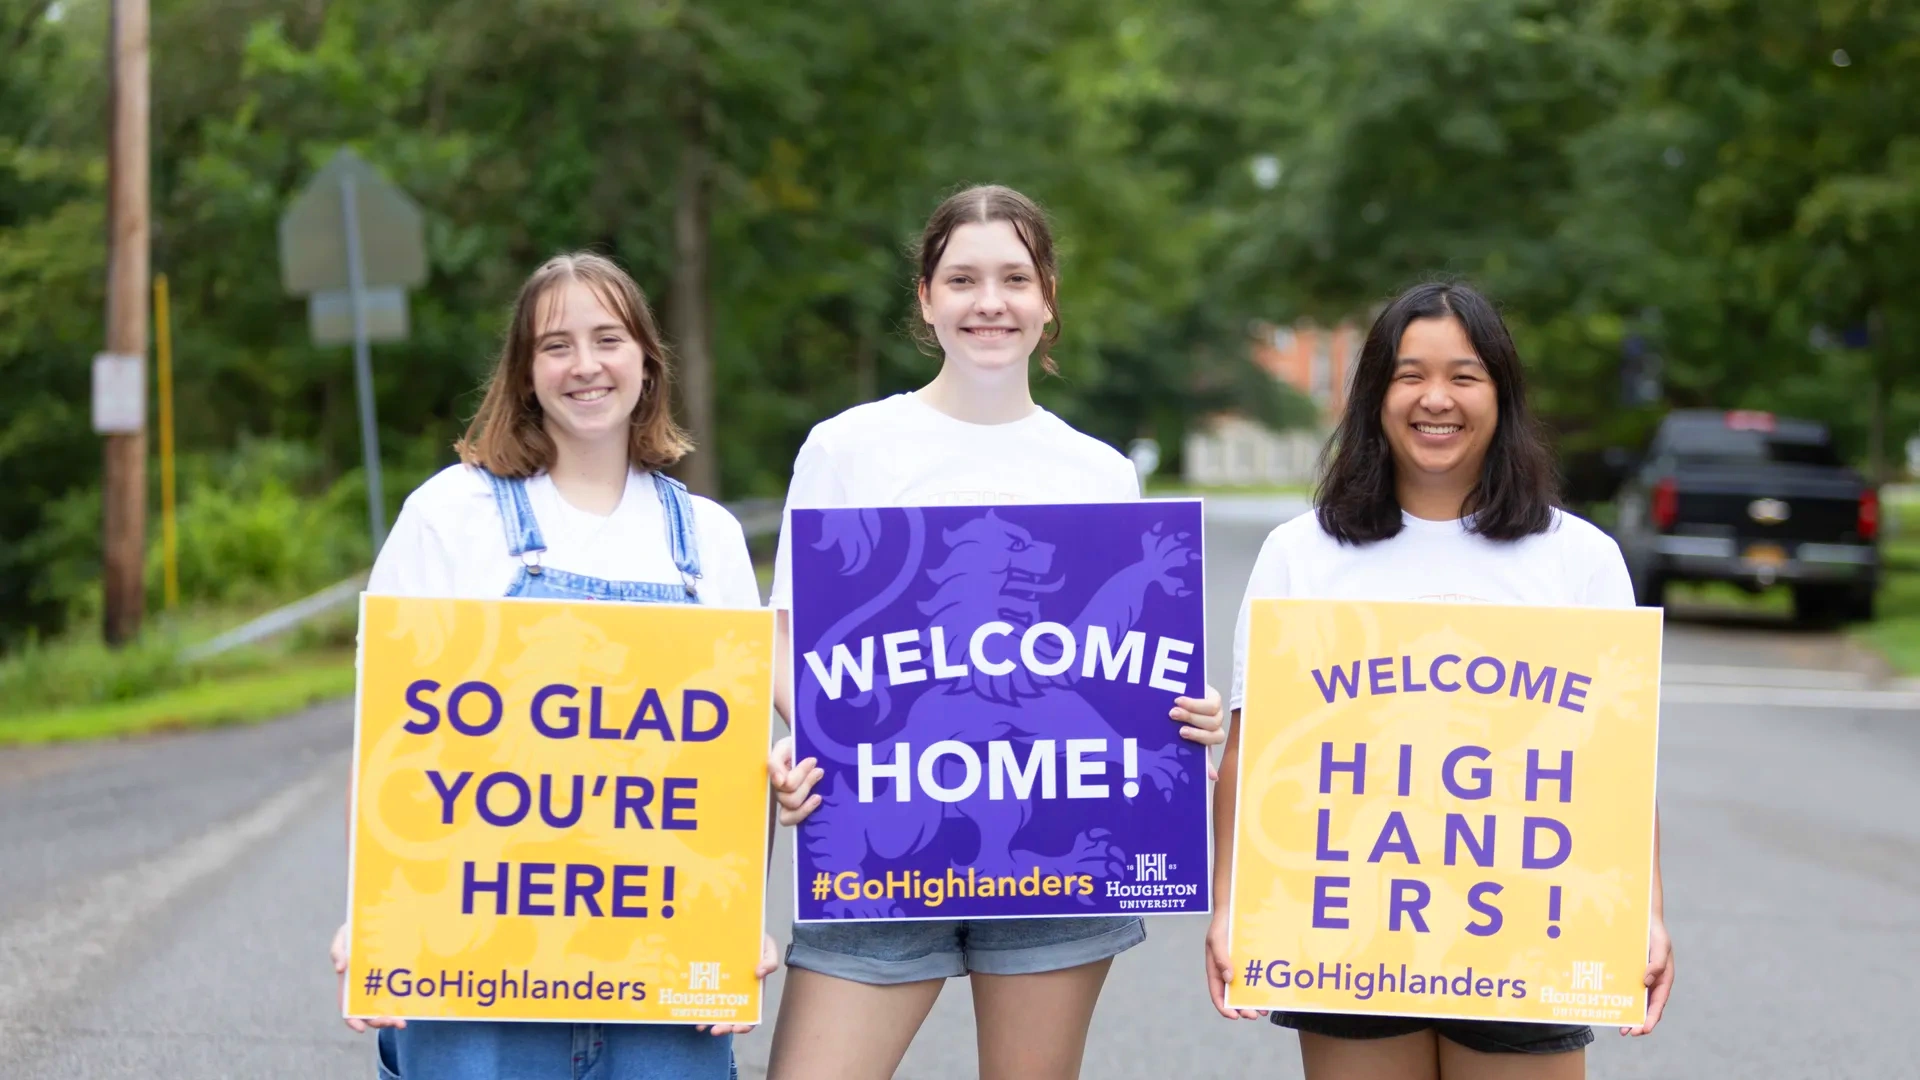 Three Houghton students welcoming new students with large gold and purple signs during move-in day.